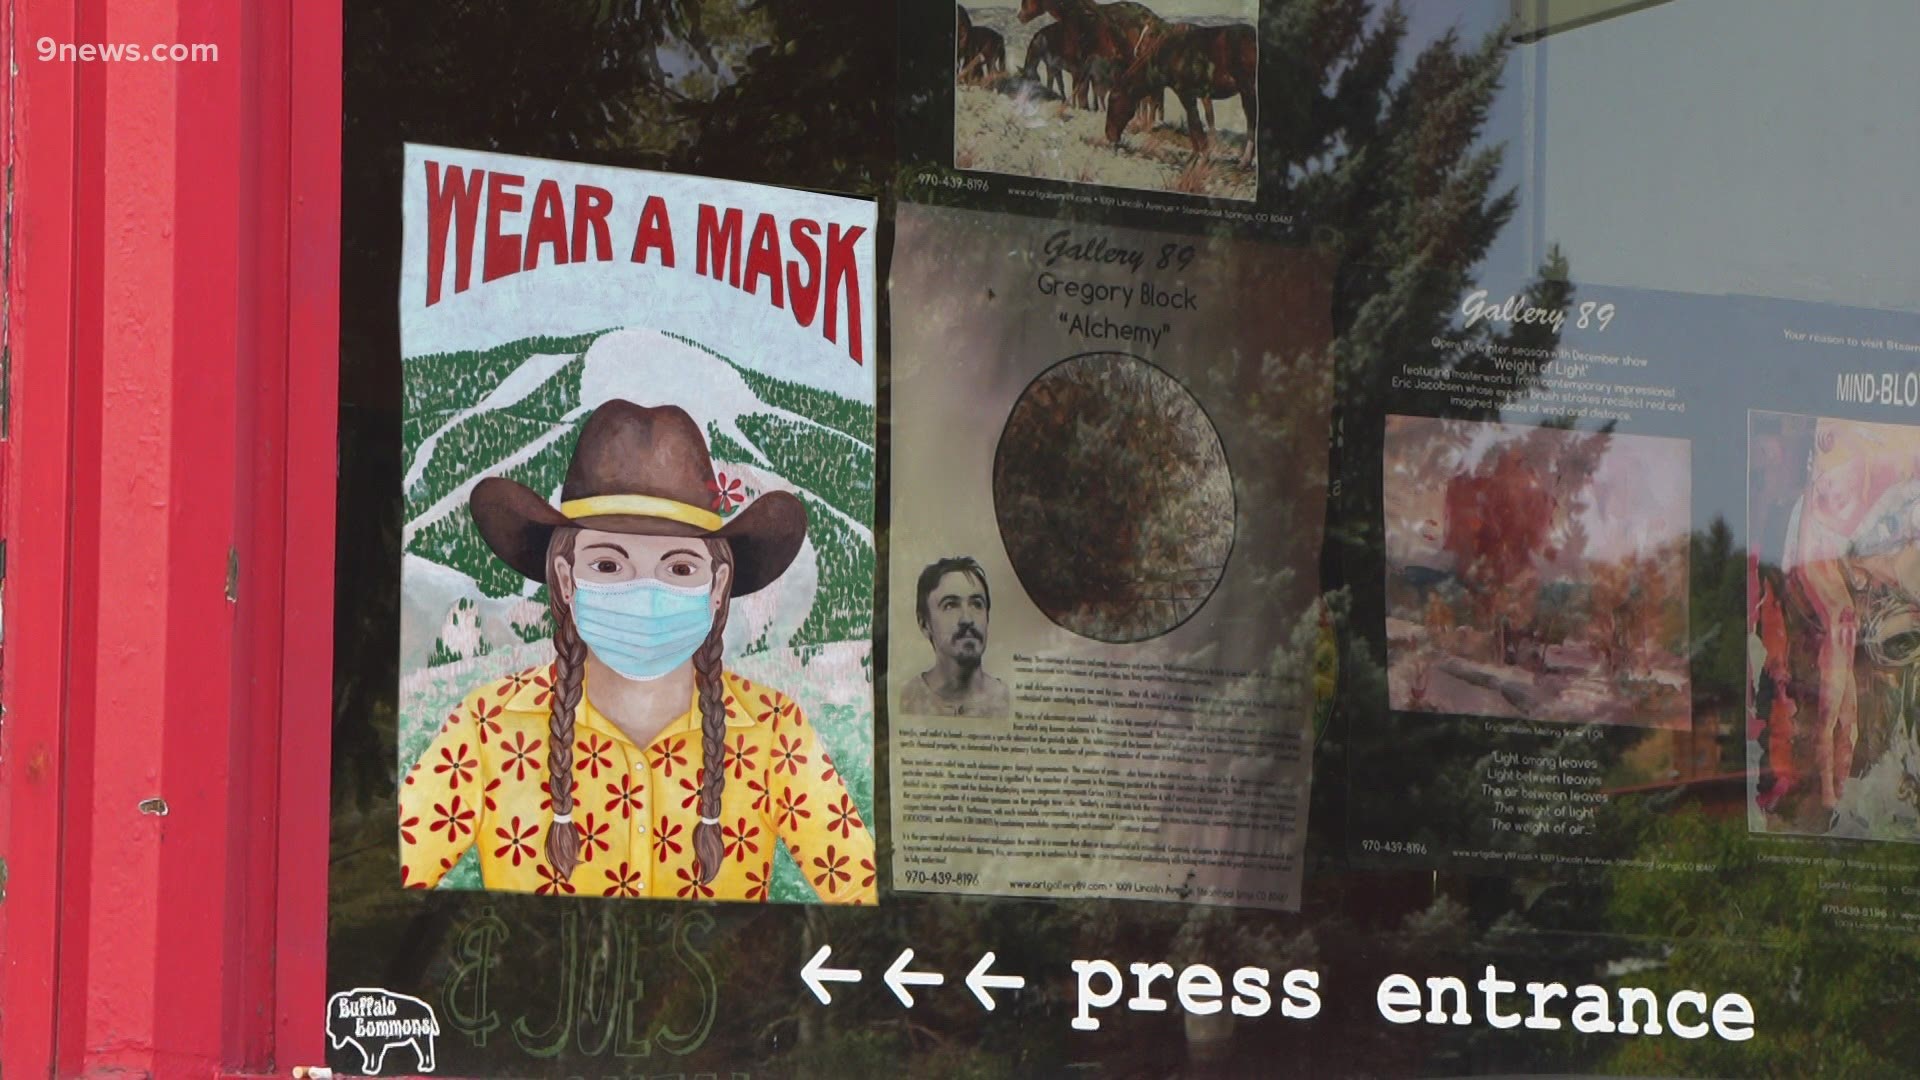 Steamboat Springs has commissioned artist Jill Bergman to paint public health posters for things like mask wearing and promoting social distancing.